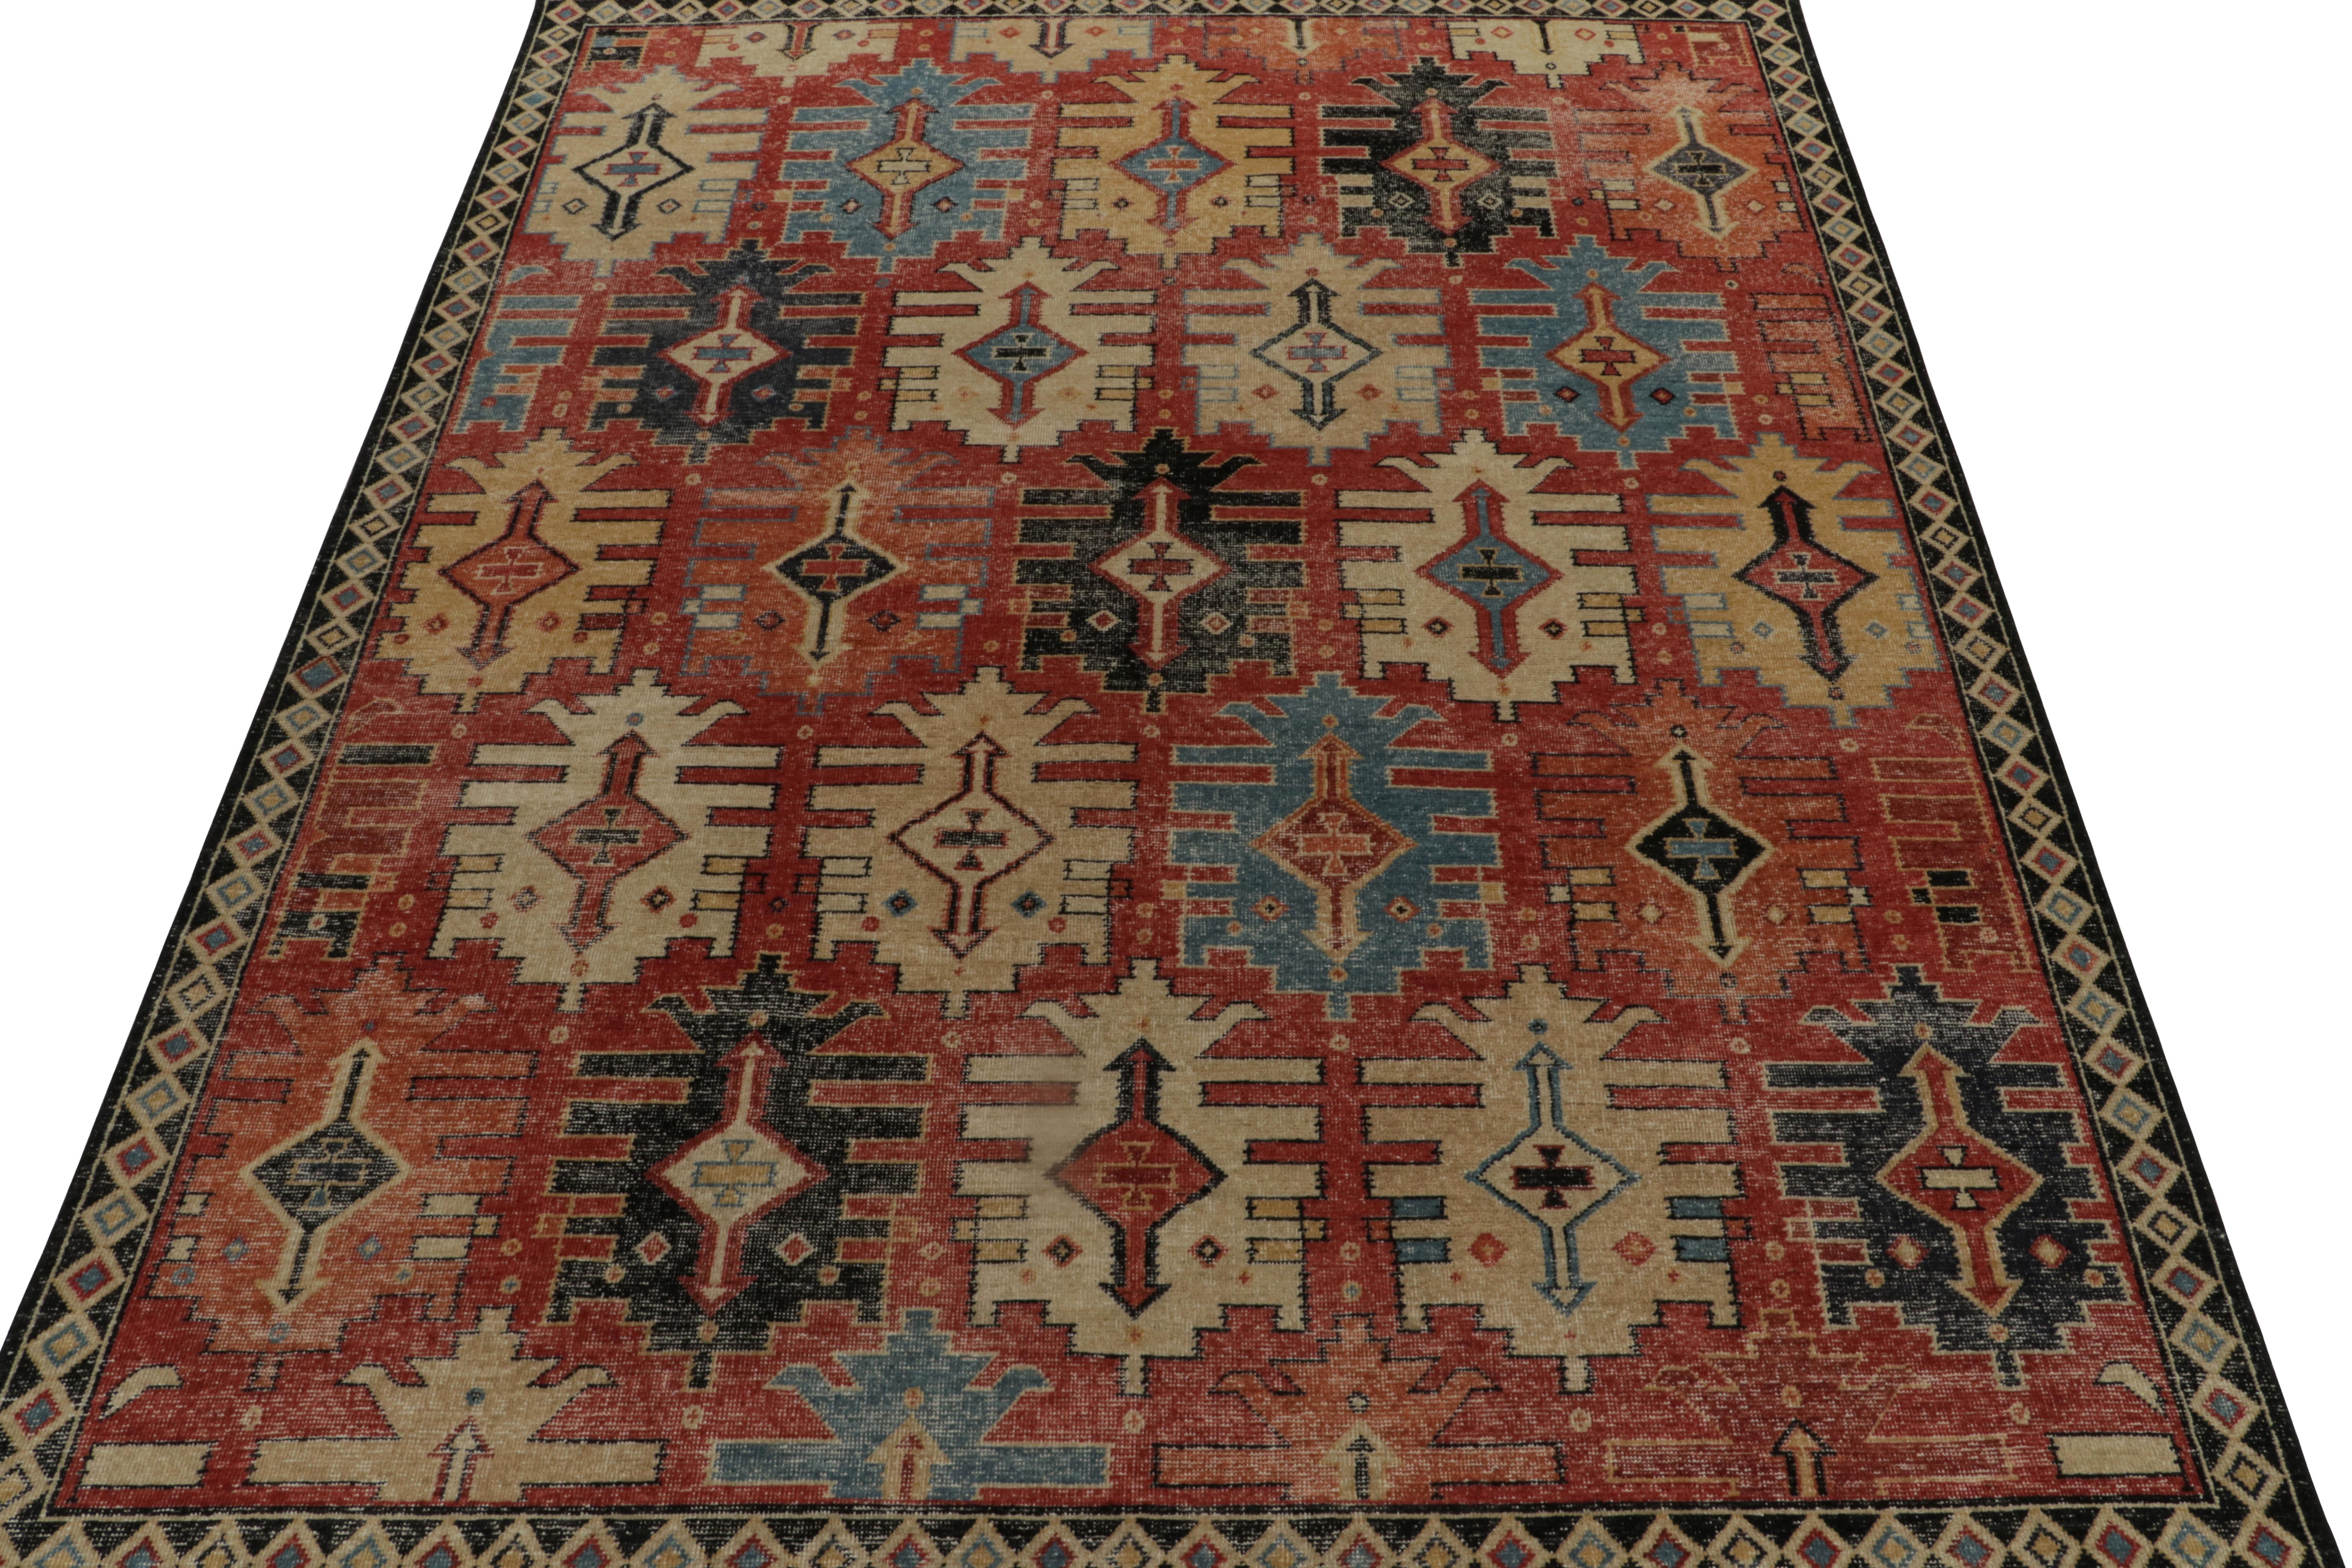 Indian Rug & Kilim’s Distressed Style Rug in Red, Black, Beige, Gold Tribal Patterns For Sale